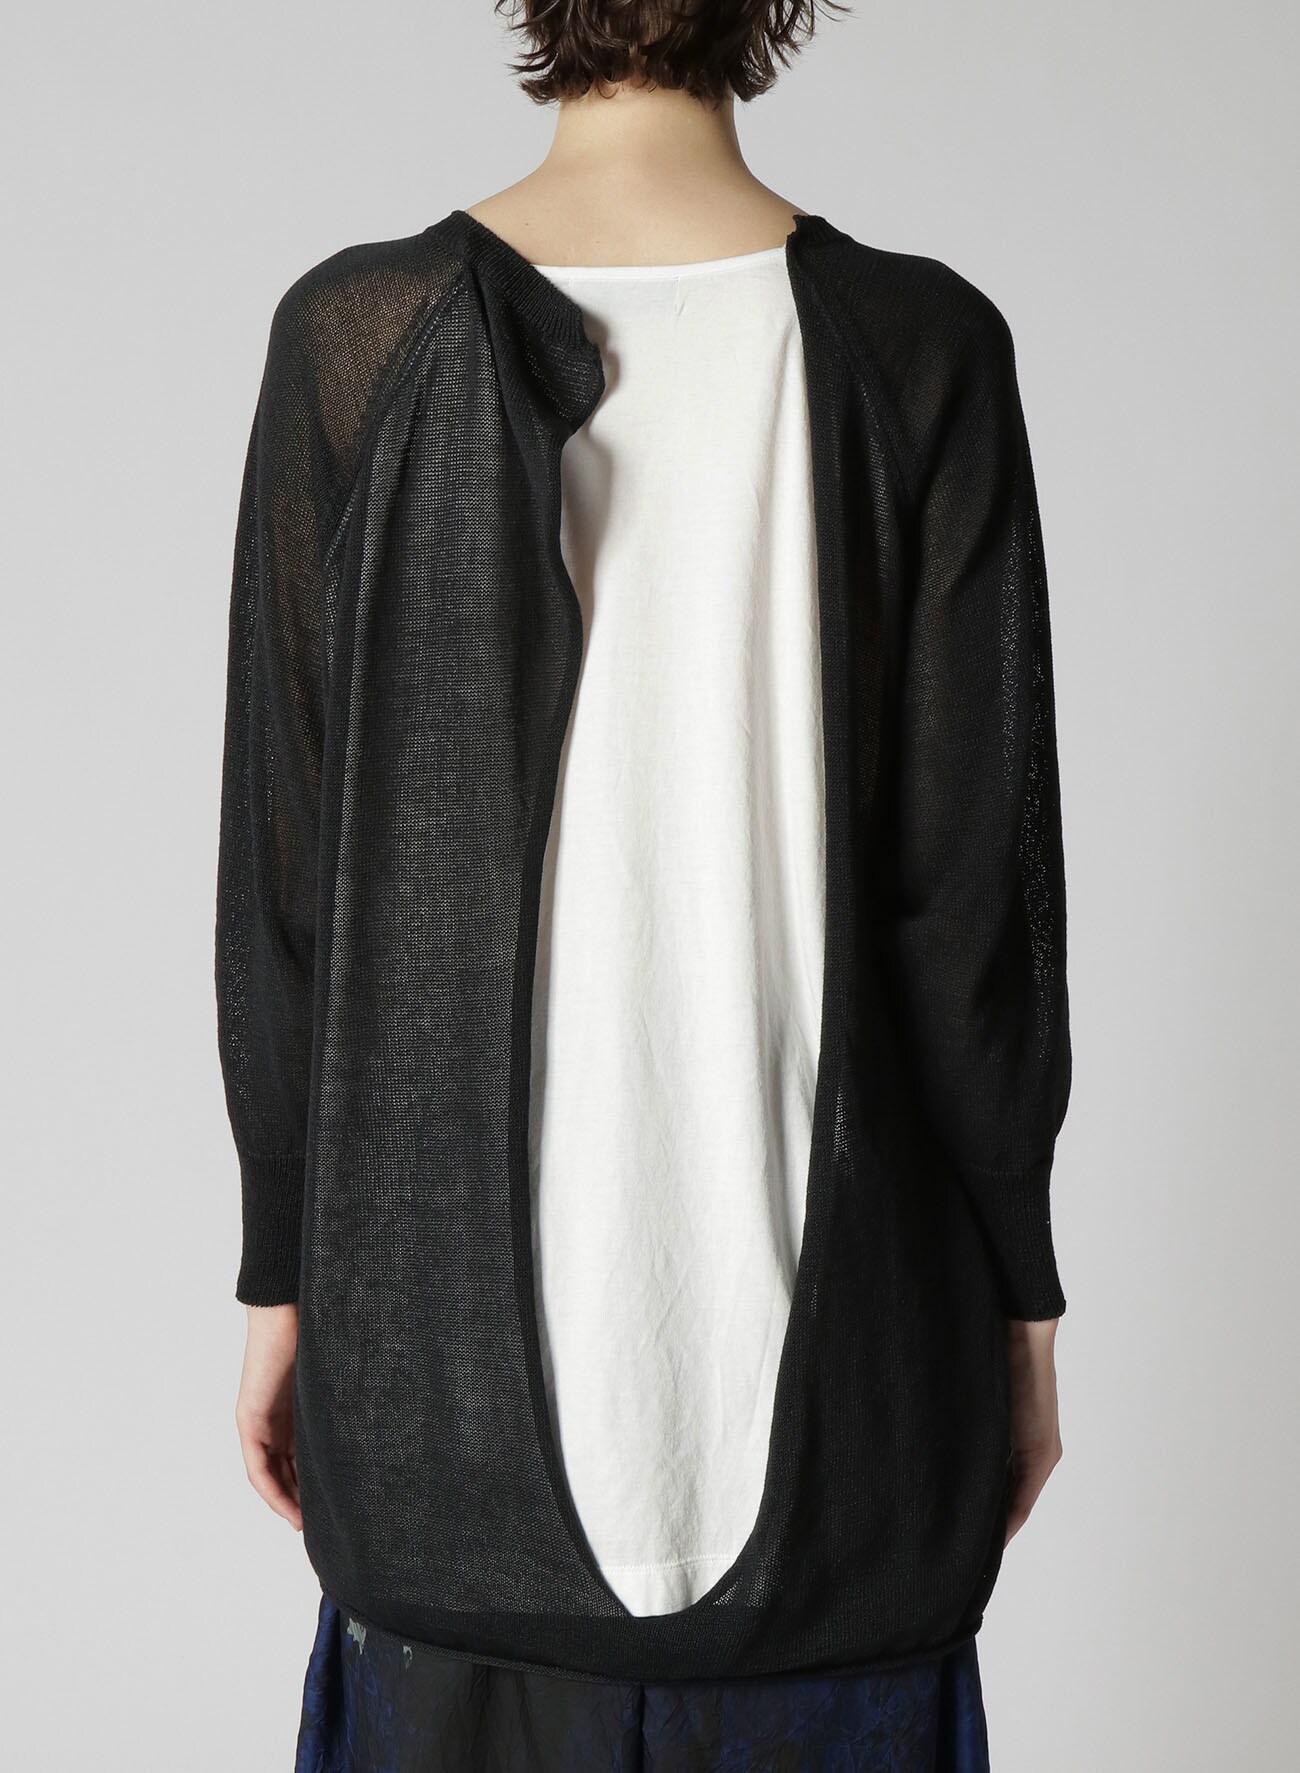 LINEN-LIKE COTTON LAYERED PULLOVER